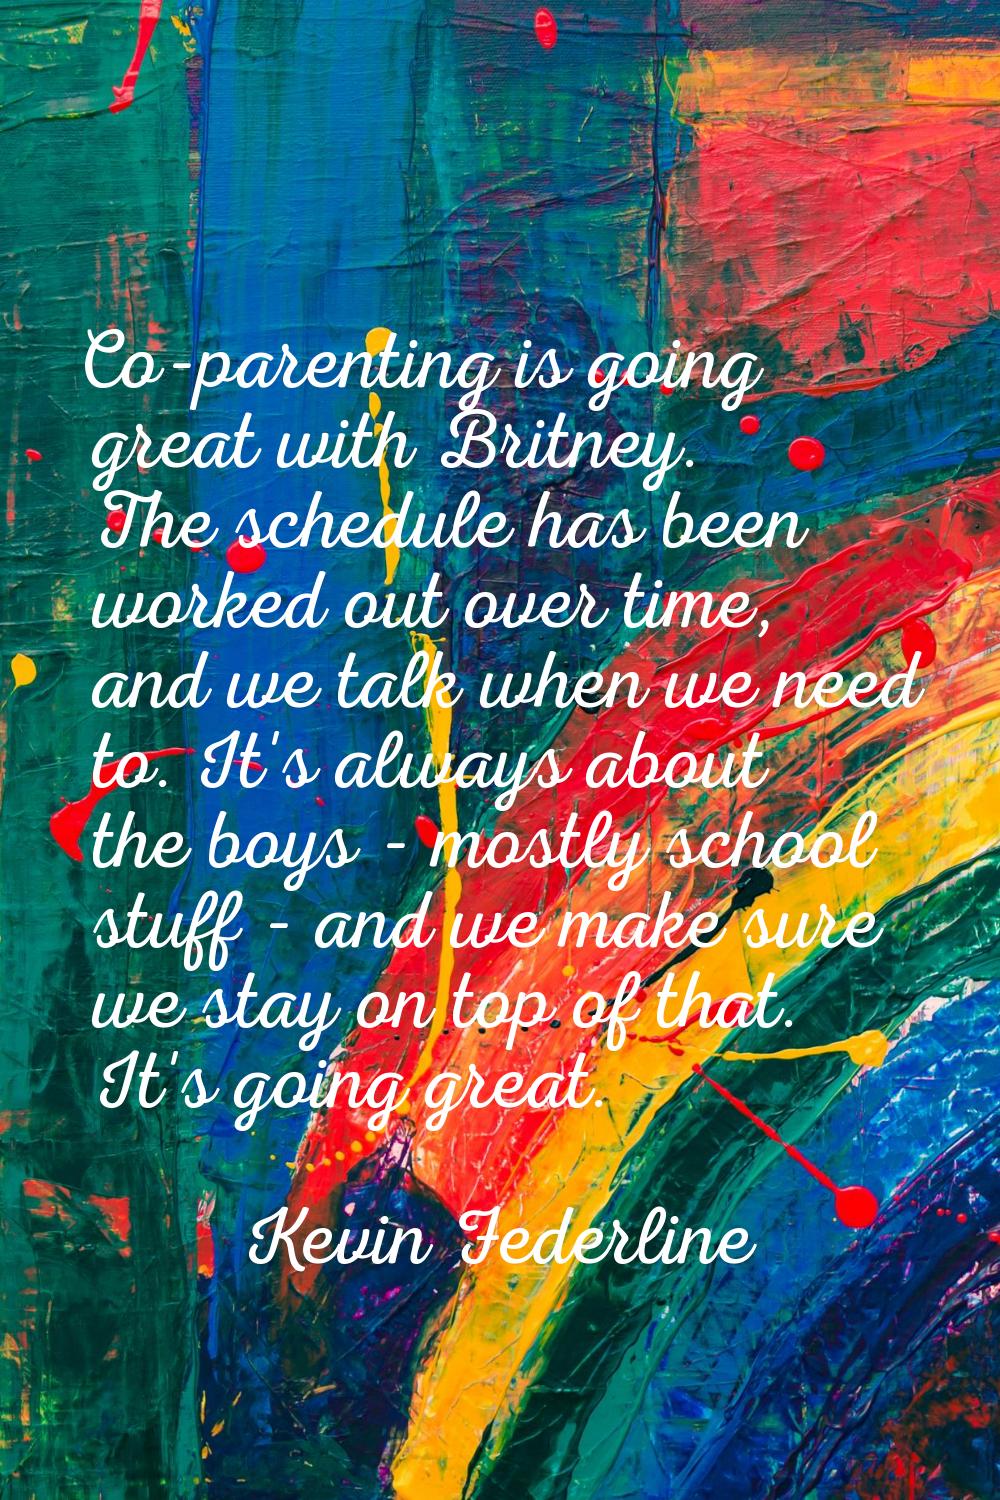 Co-parenting is going great with Britney. The schedule has been worked out over time, and we talk w